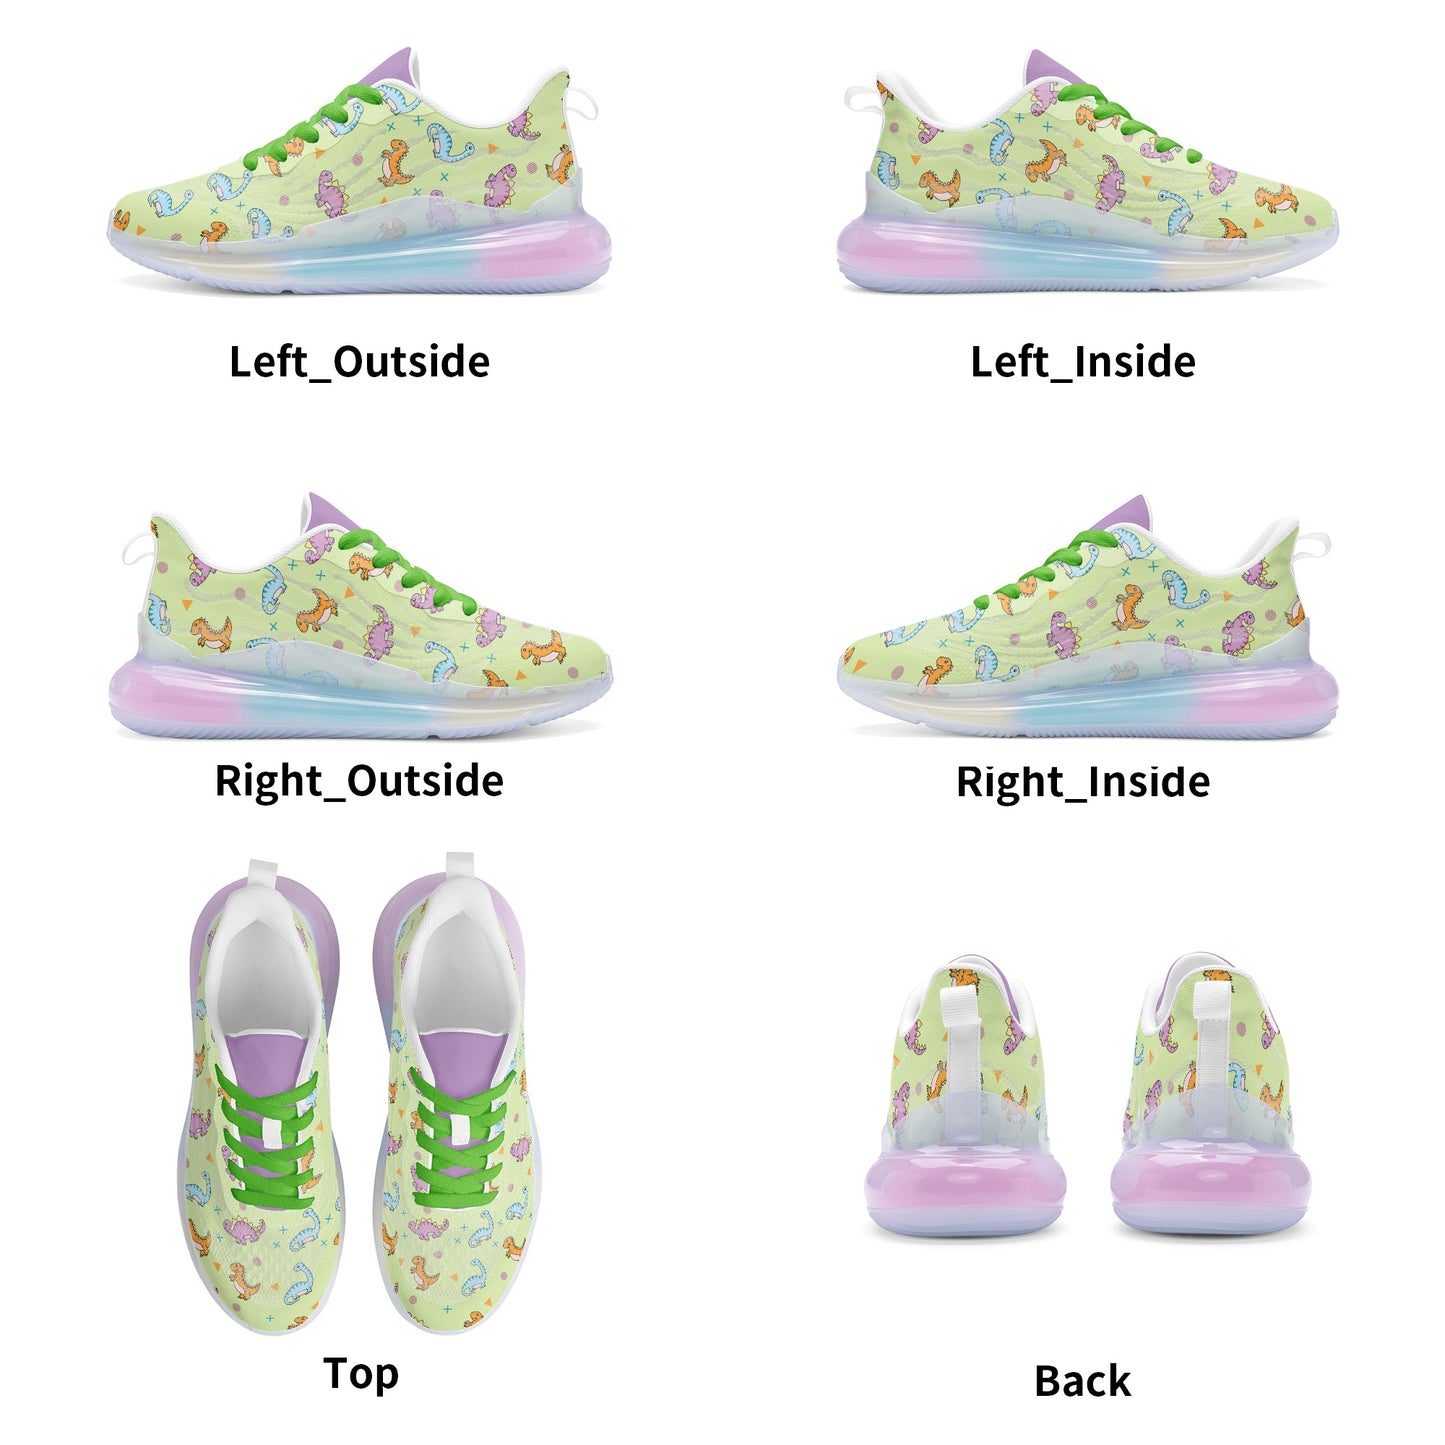 Green Baby Dinos Ladies Shoes